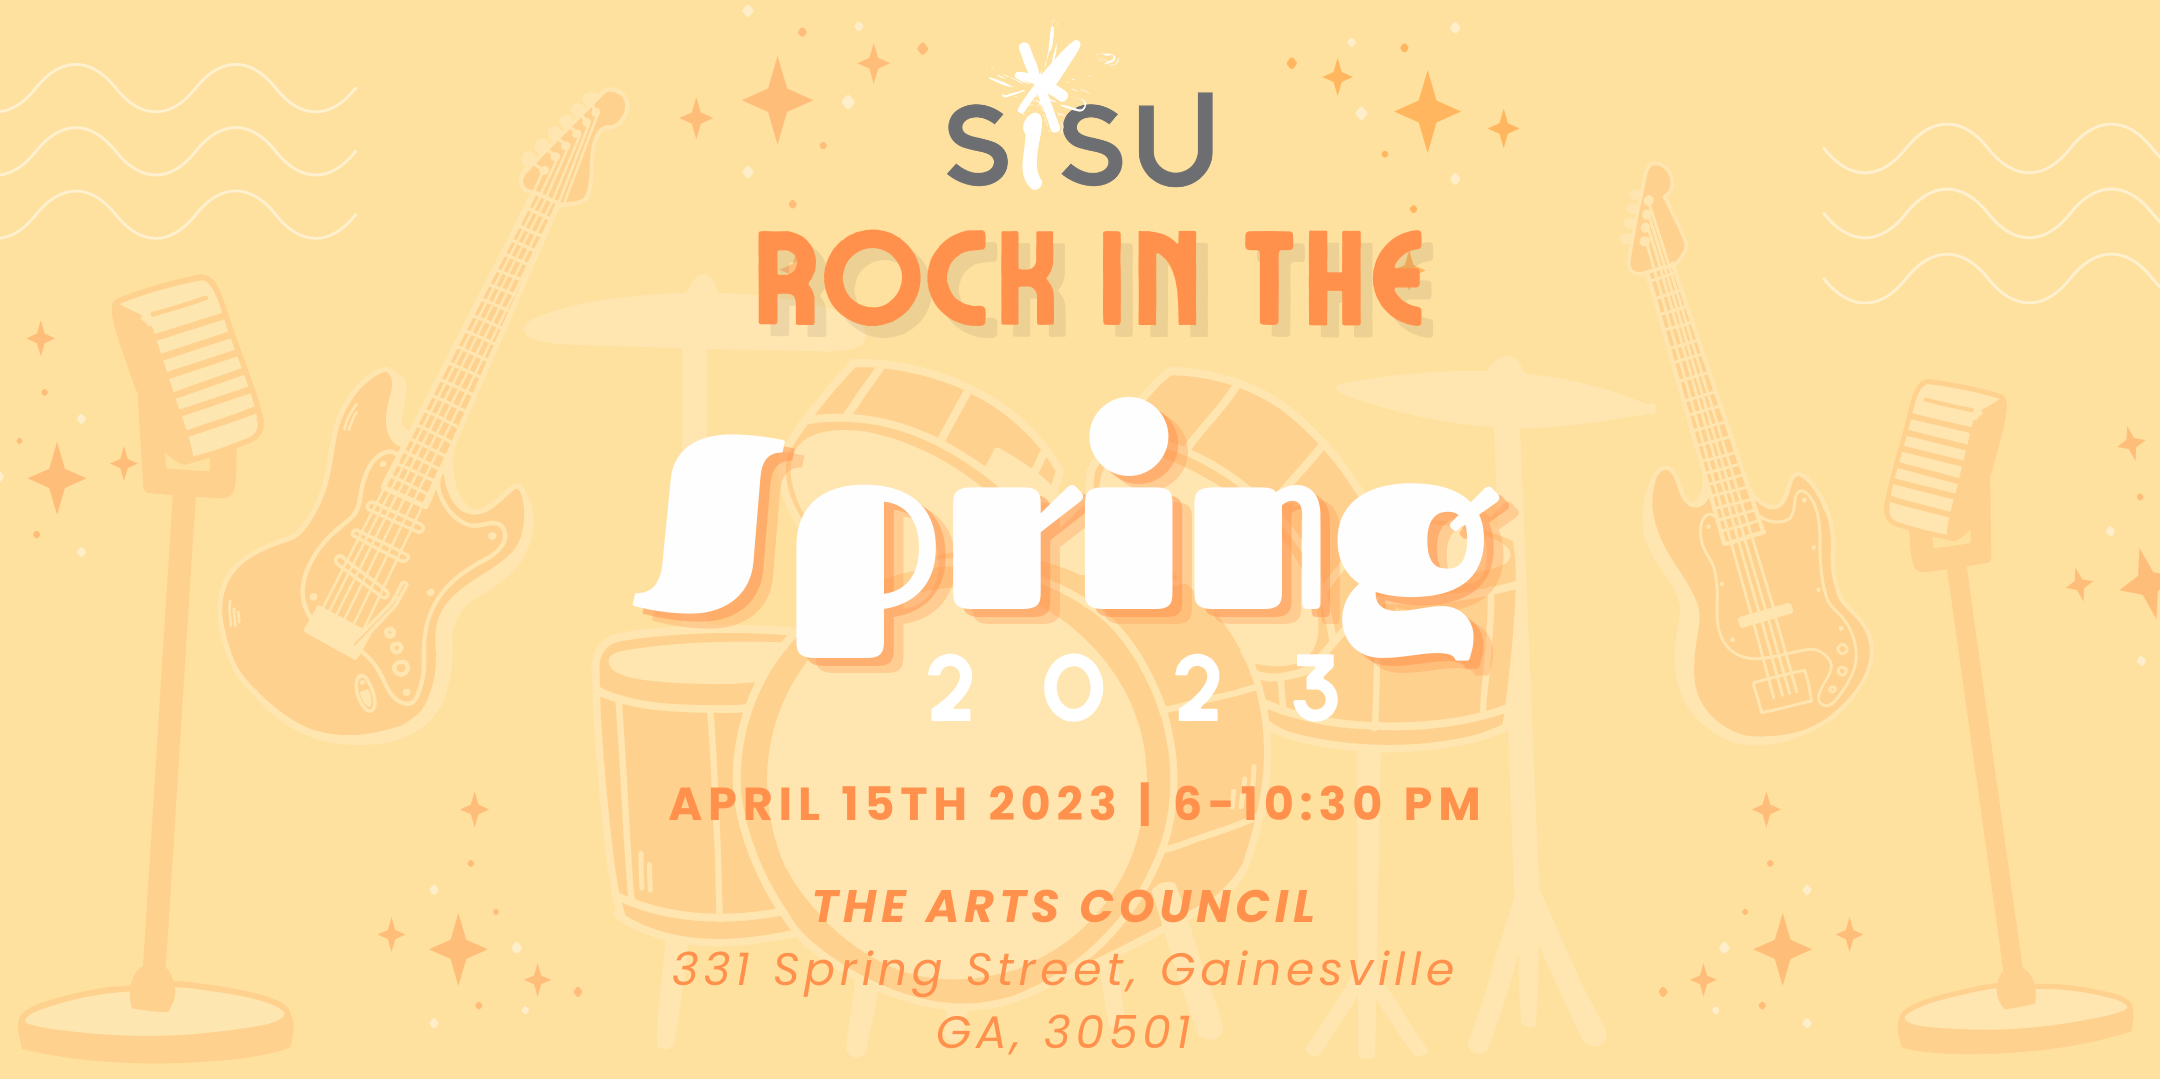 Rock in the Spring 2023!